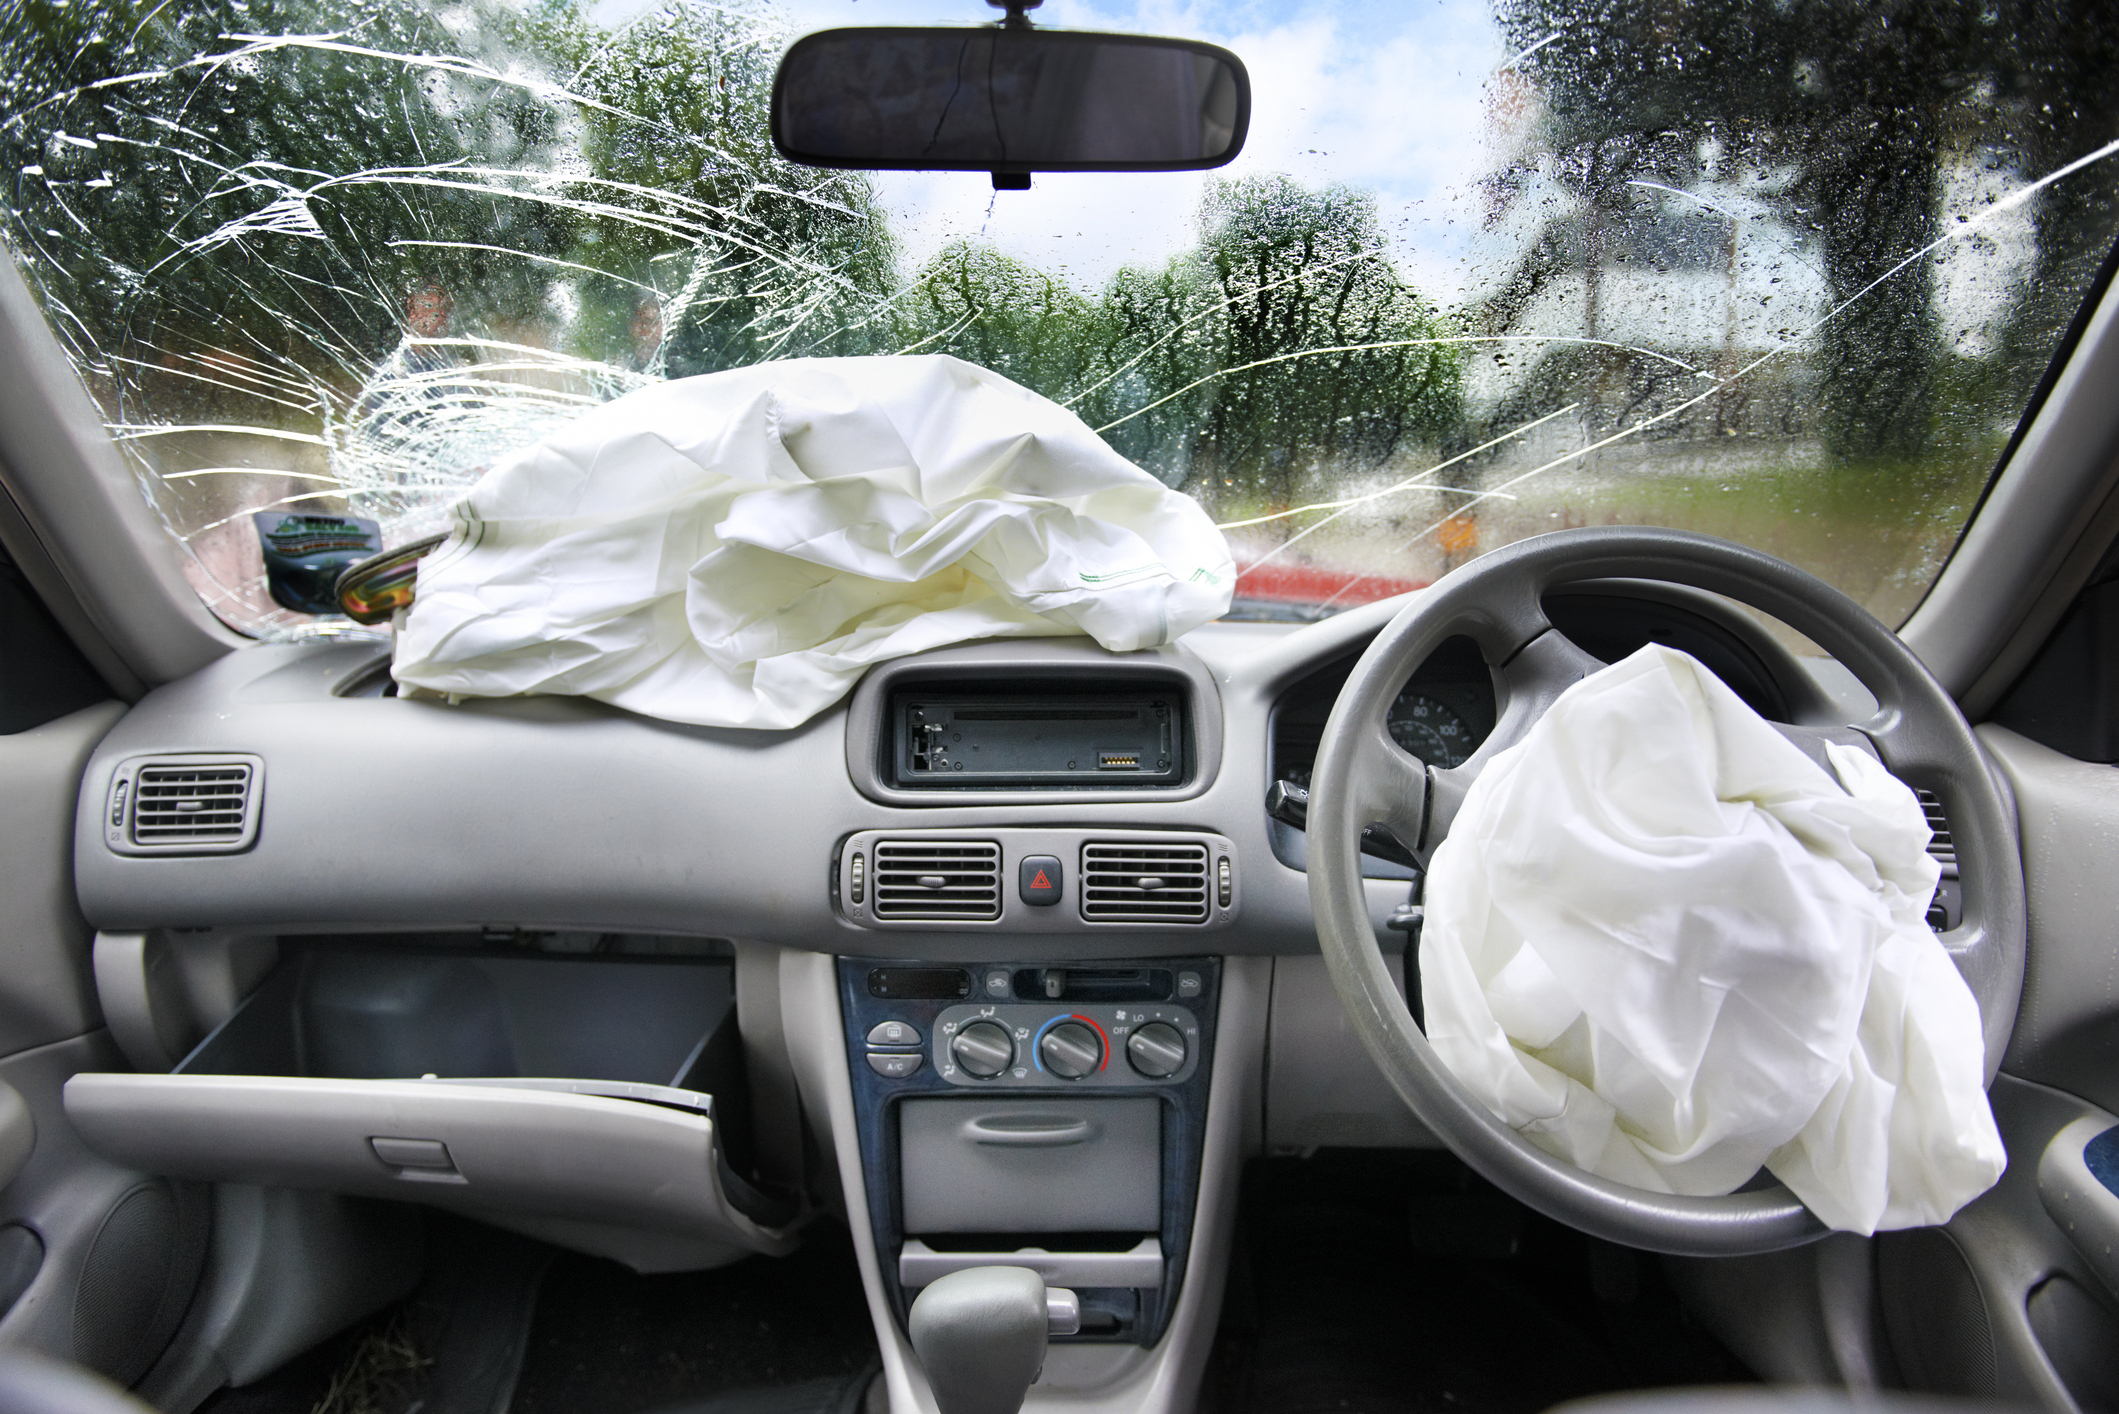 A car&#x27;s interior after an accident, showing deployed airbags and a shattered windshield. The vehicle&#x27;s dashboard, steering wheel, and broken glass are visible